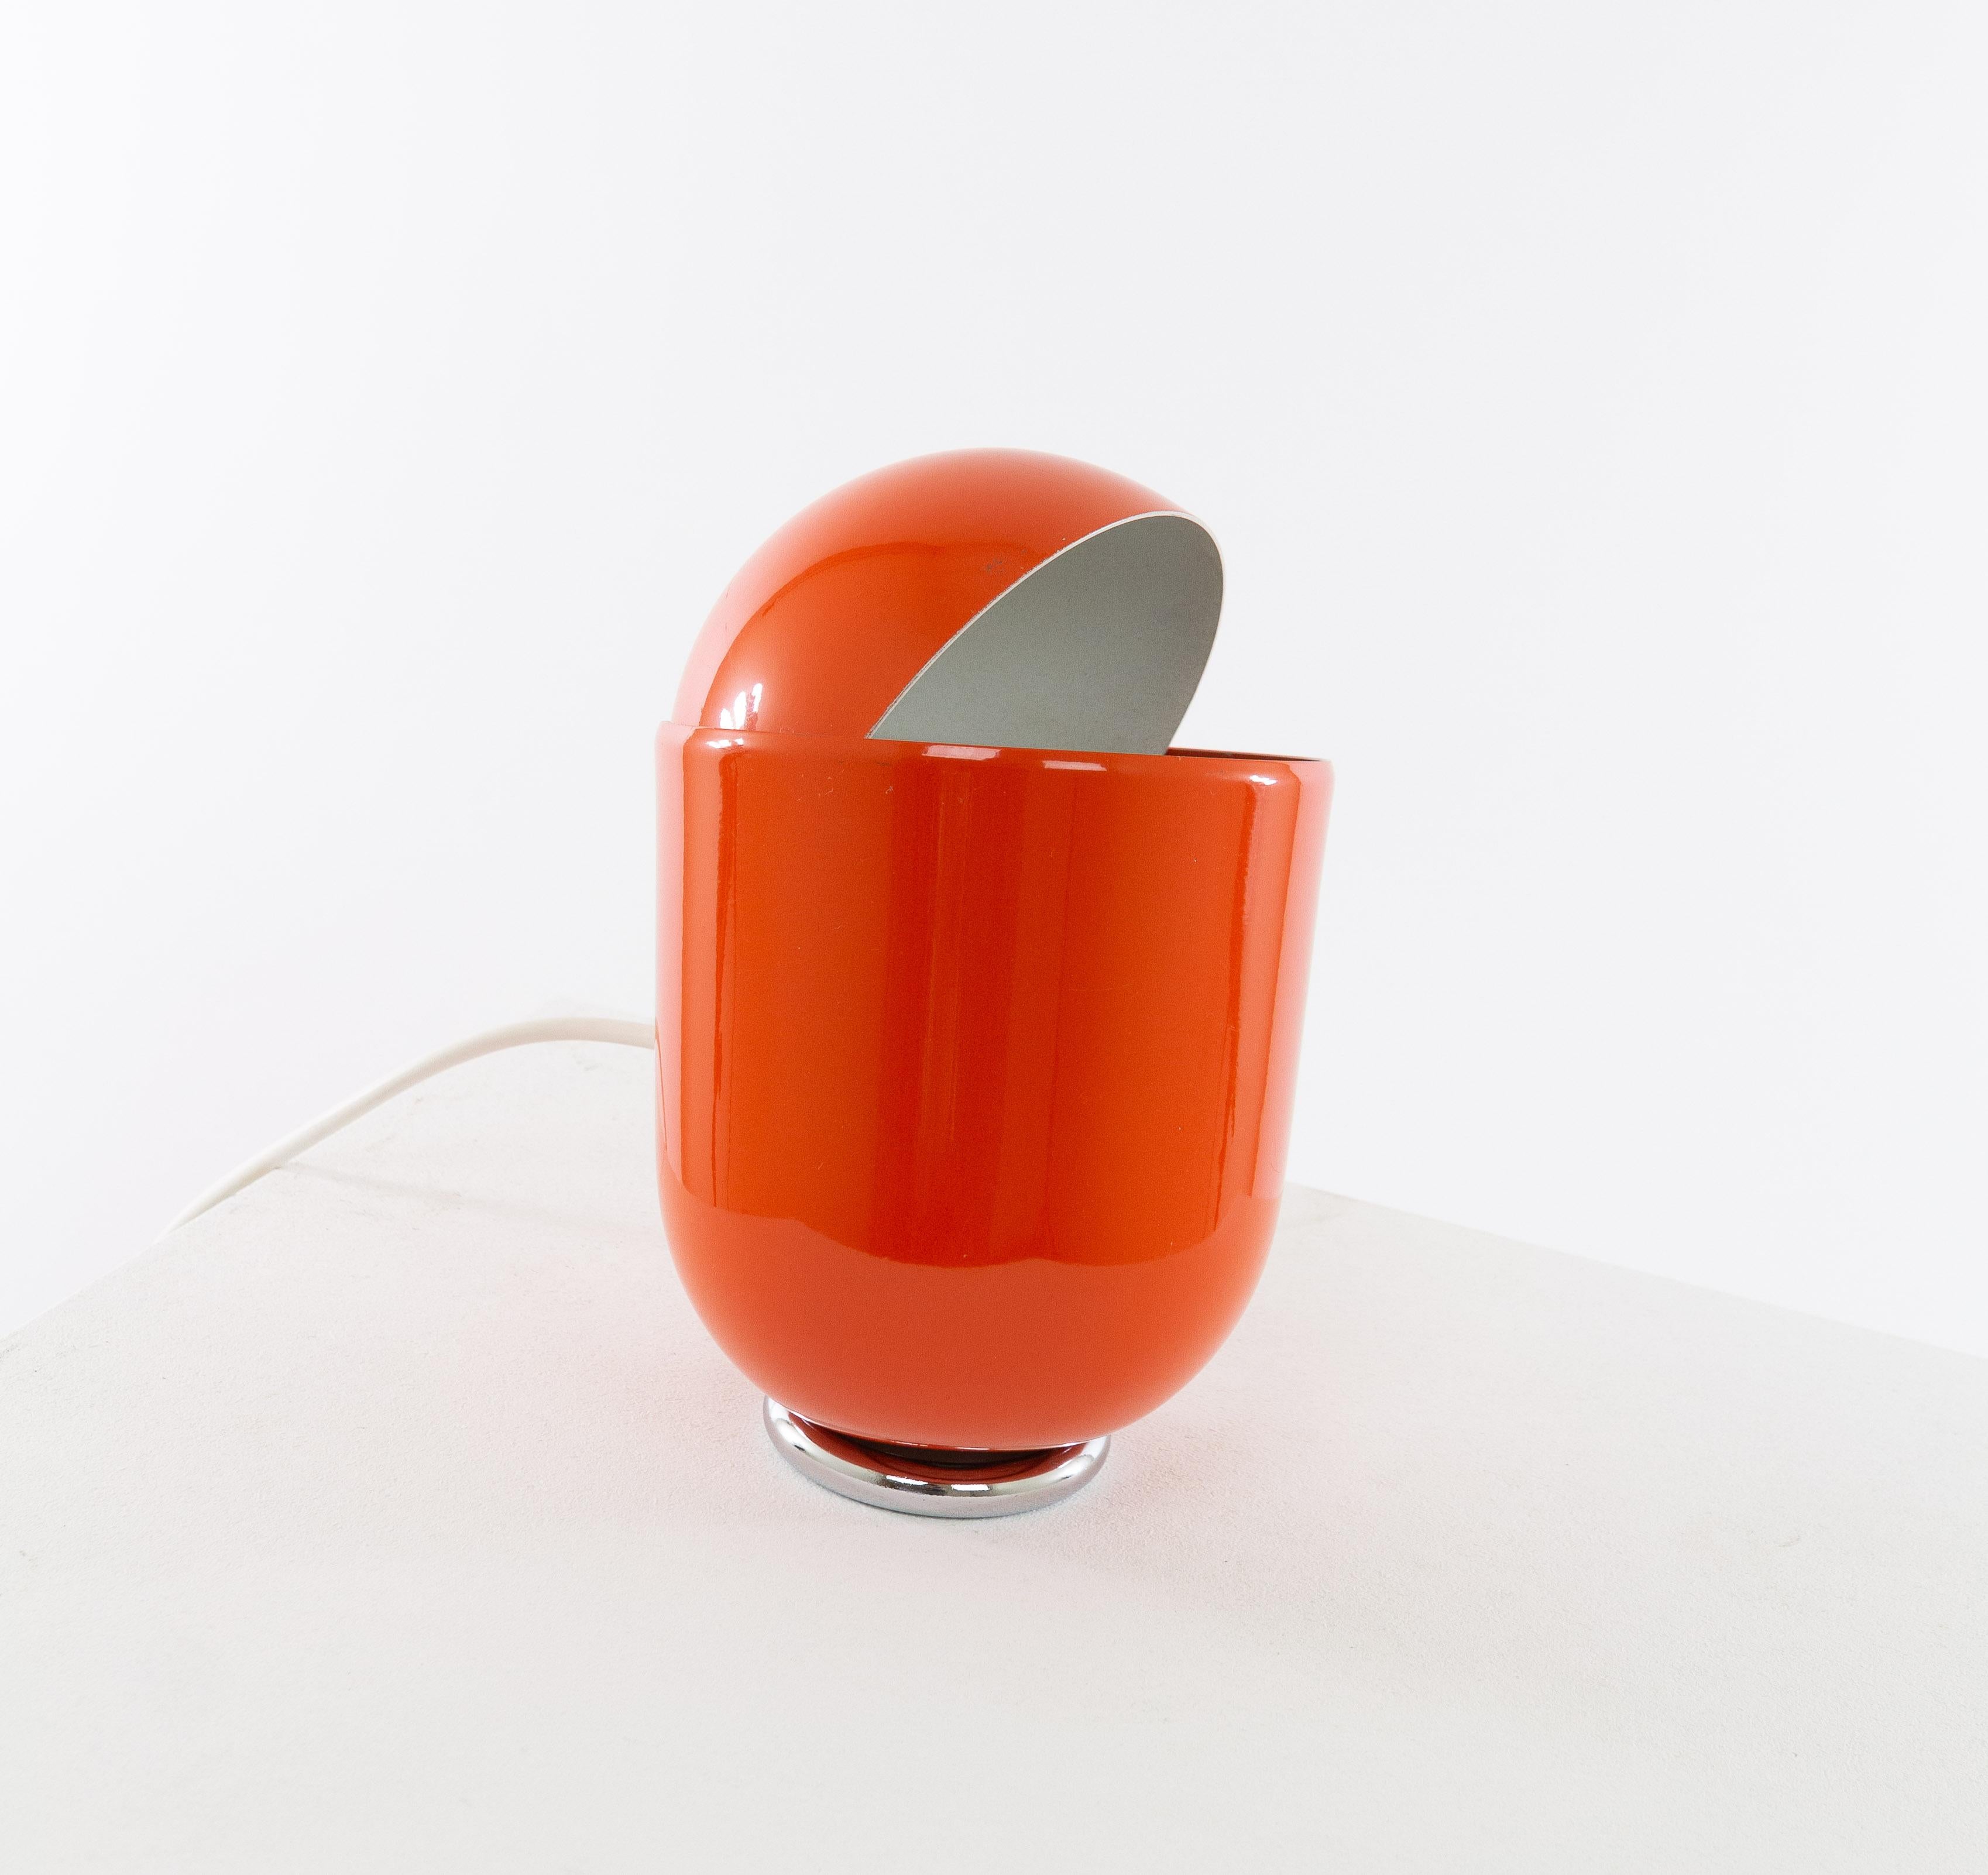 Orange adjustable table lamp, Elmo, designed and produced by Imago DP Milano in 1971.

This relatively small table lamp has a movable shade with which the light intensity can be adjusted. The round base is weighted which allows the lamp to be